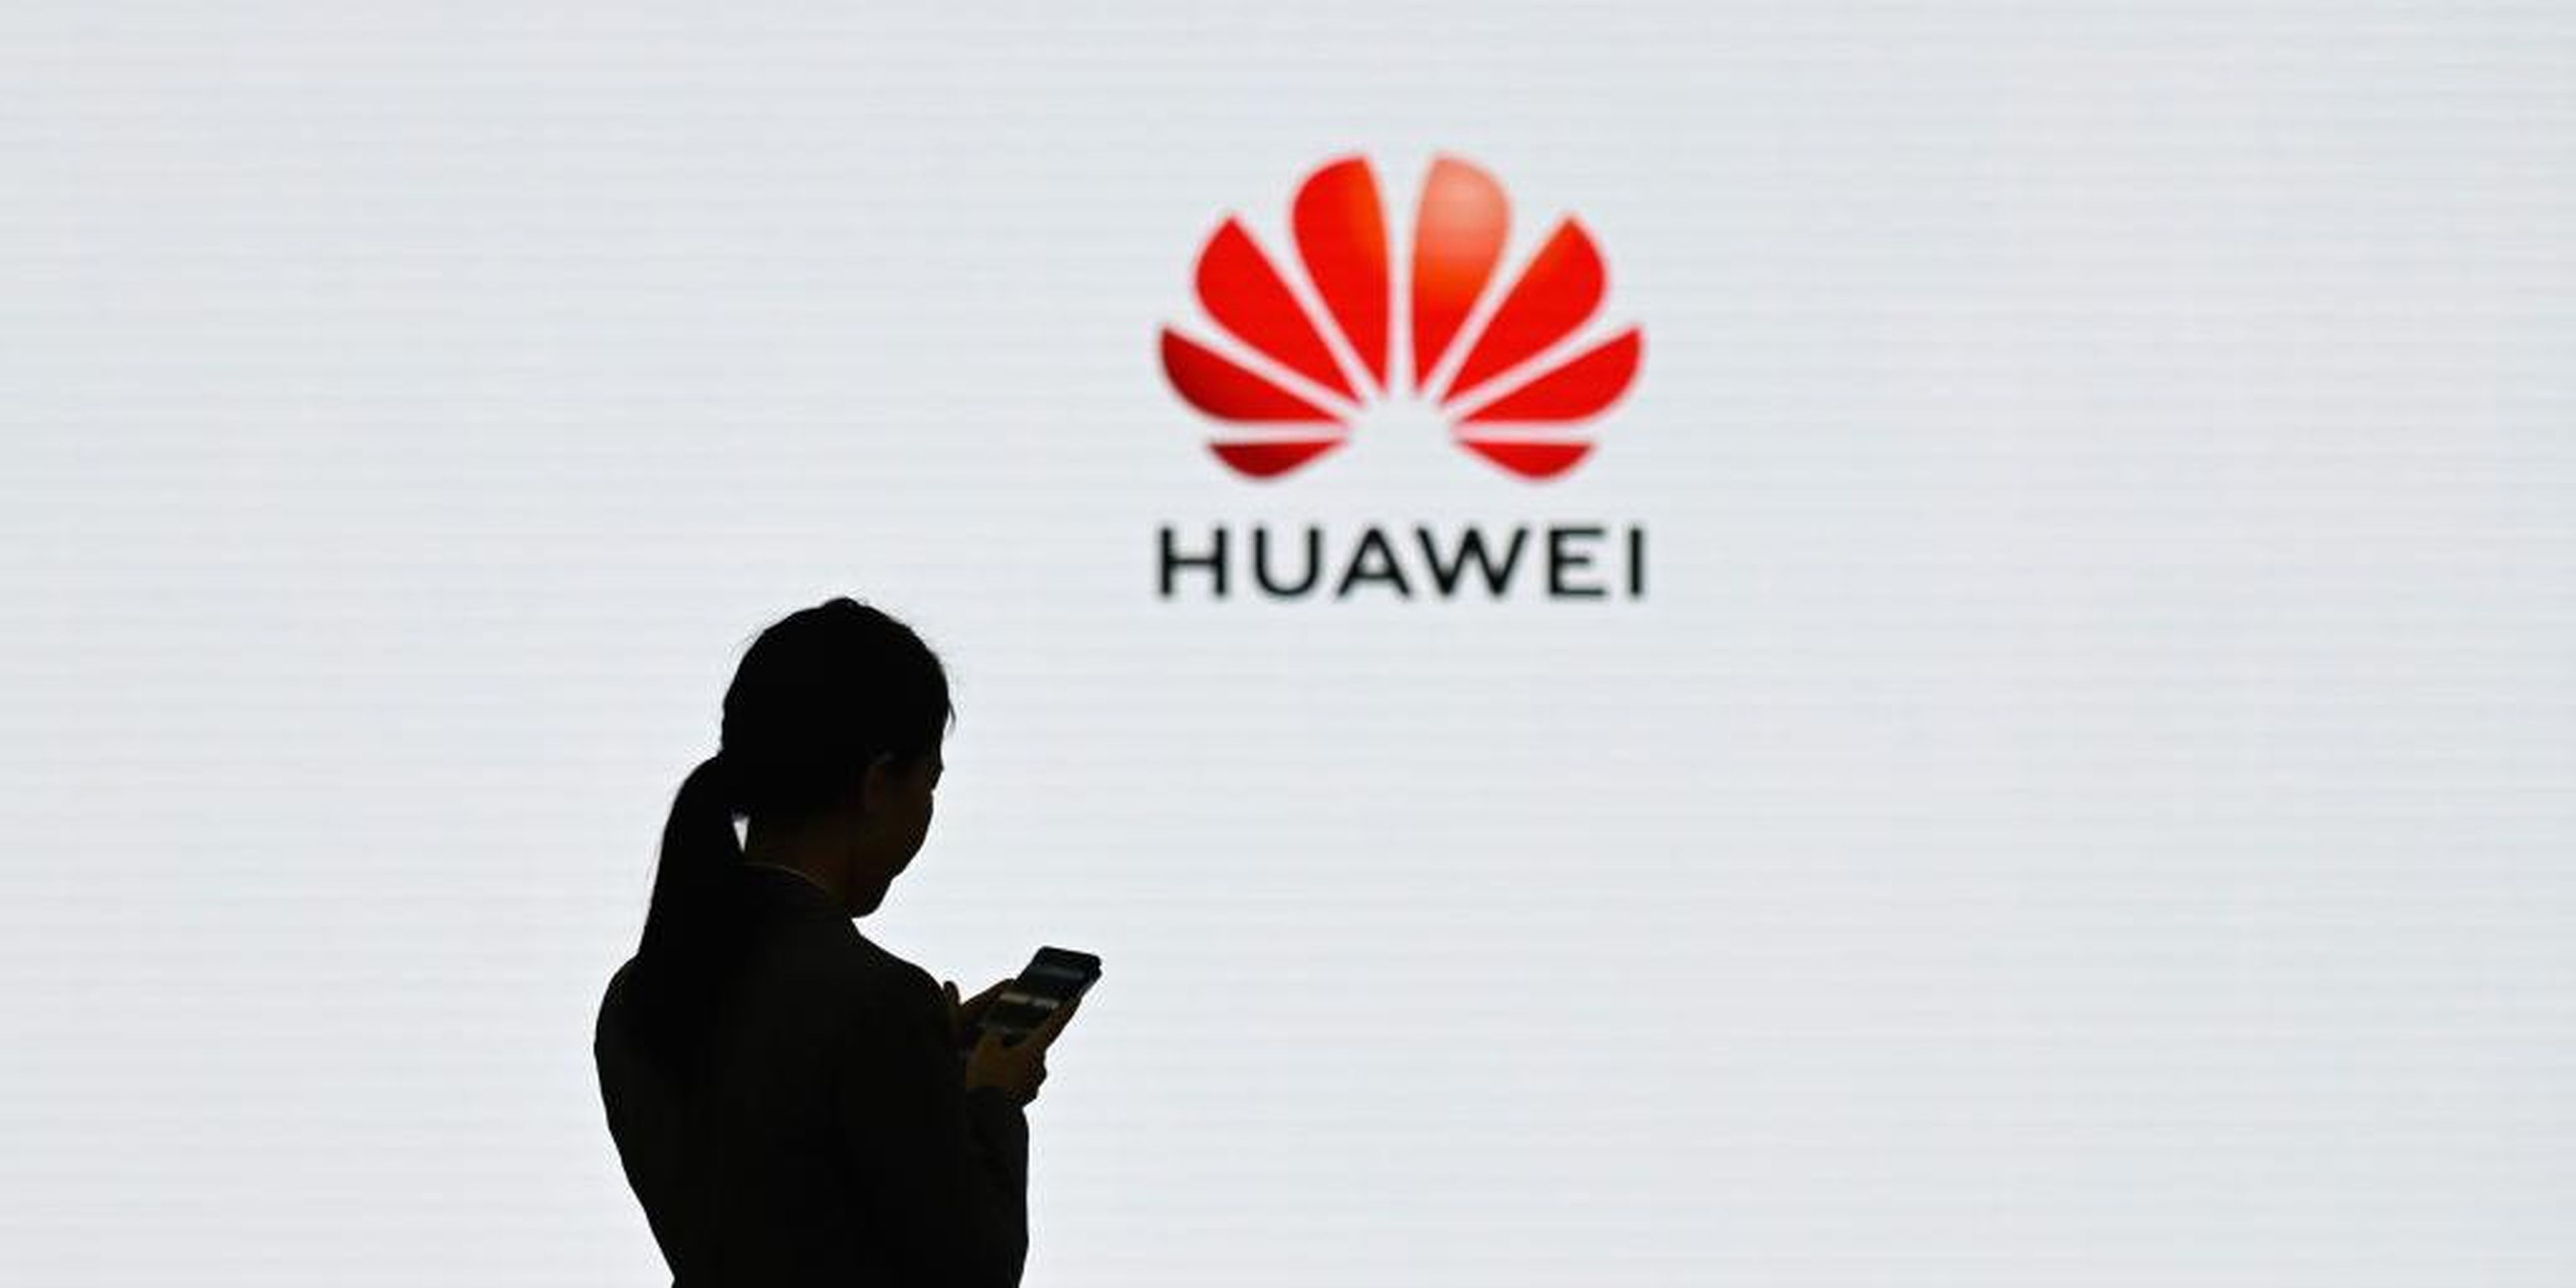 A staff member of Huawei uses her mobile phone at a conference in Shenzhen, in March 2019. The telecom company has at the center of global security concerns.